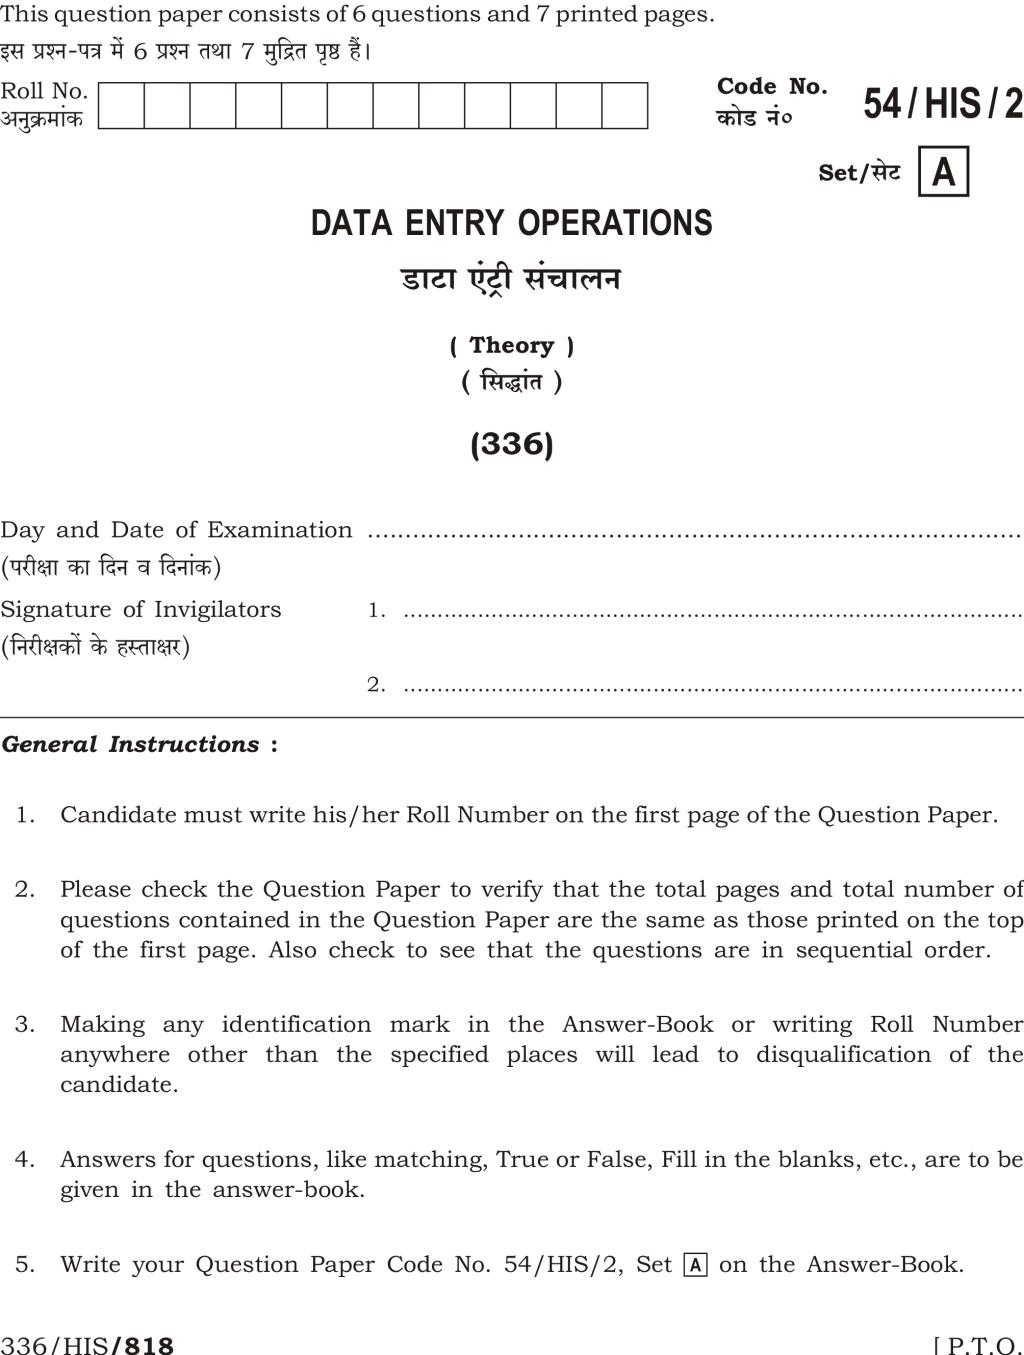 NIOS Class 12 Question Paper Apr 2017 - Data Entry Operations - Page 1